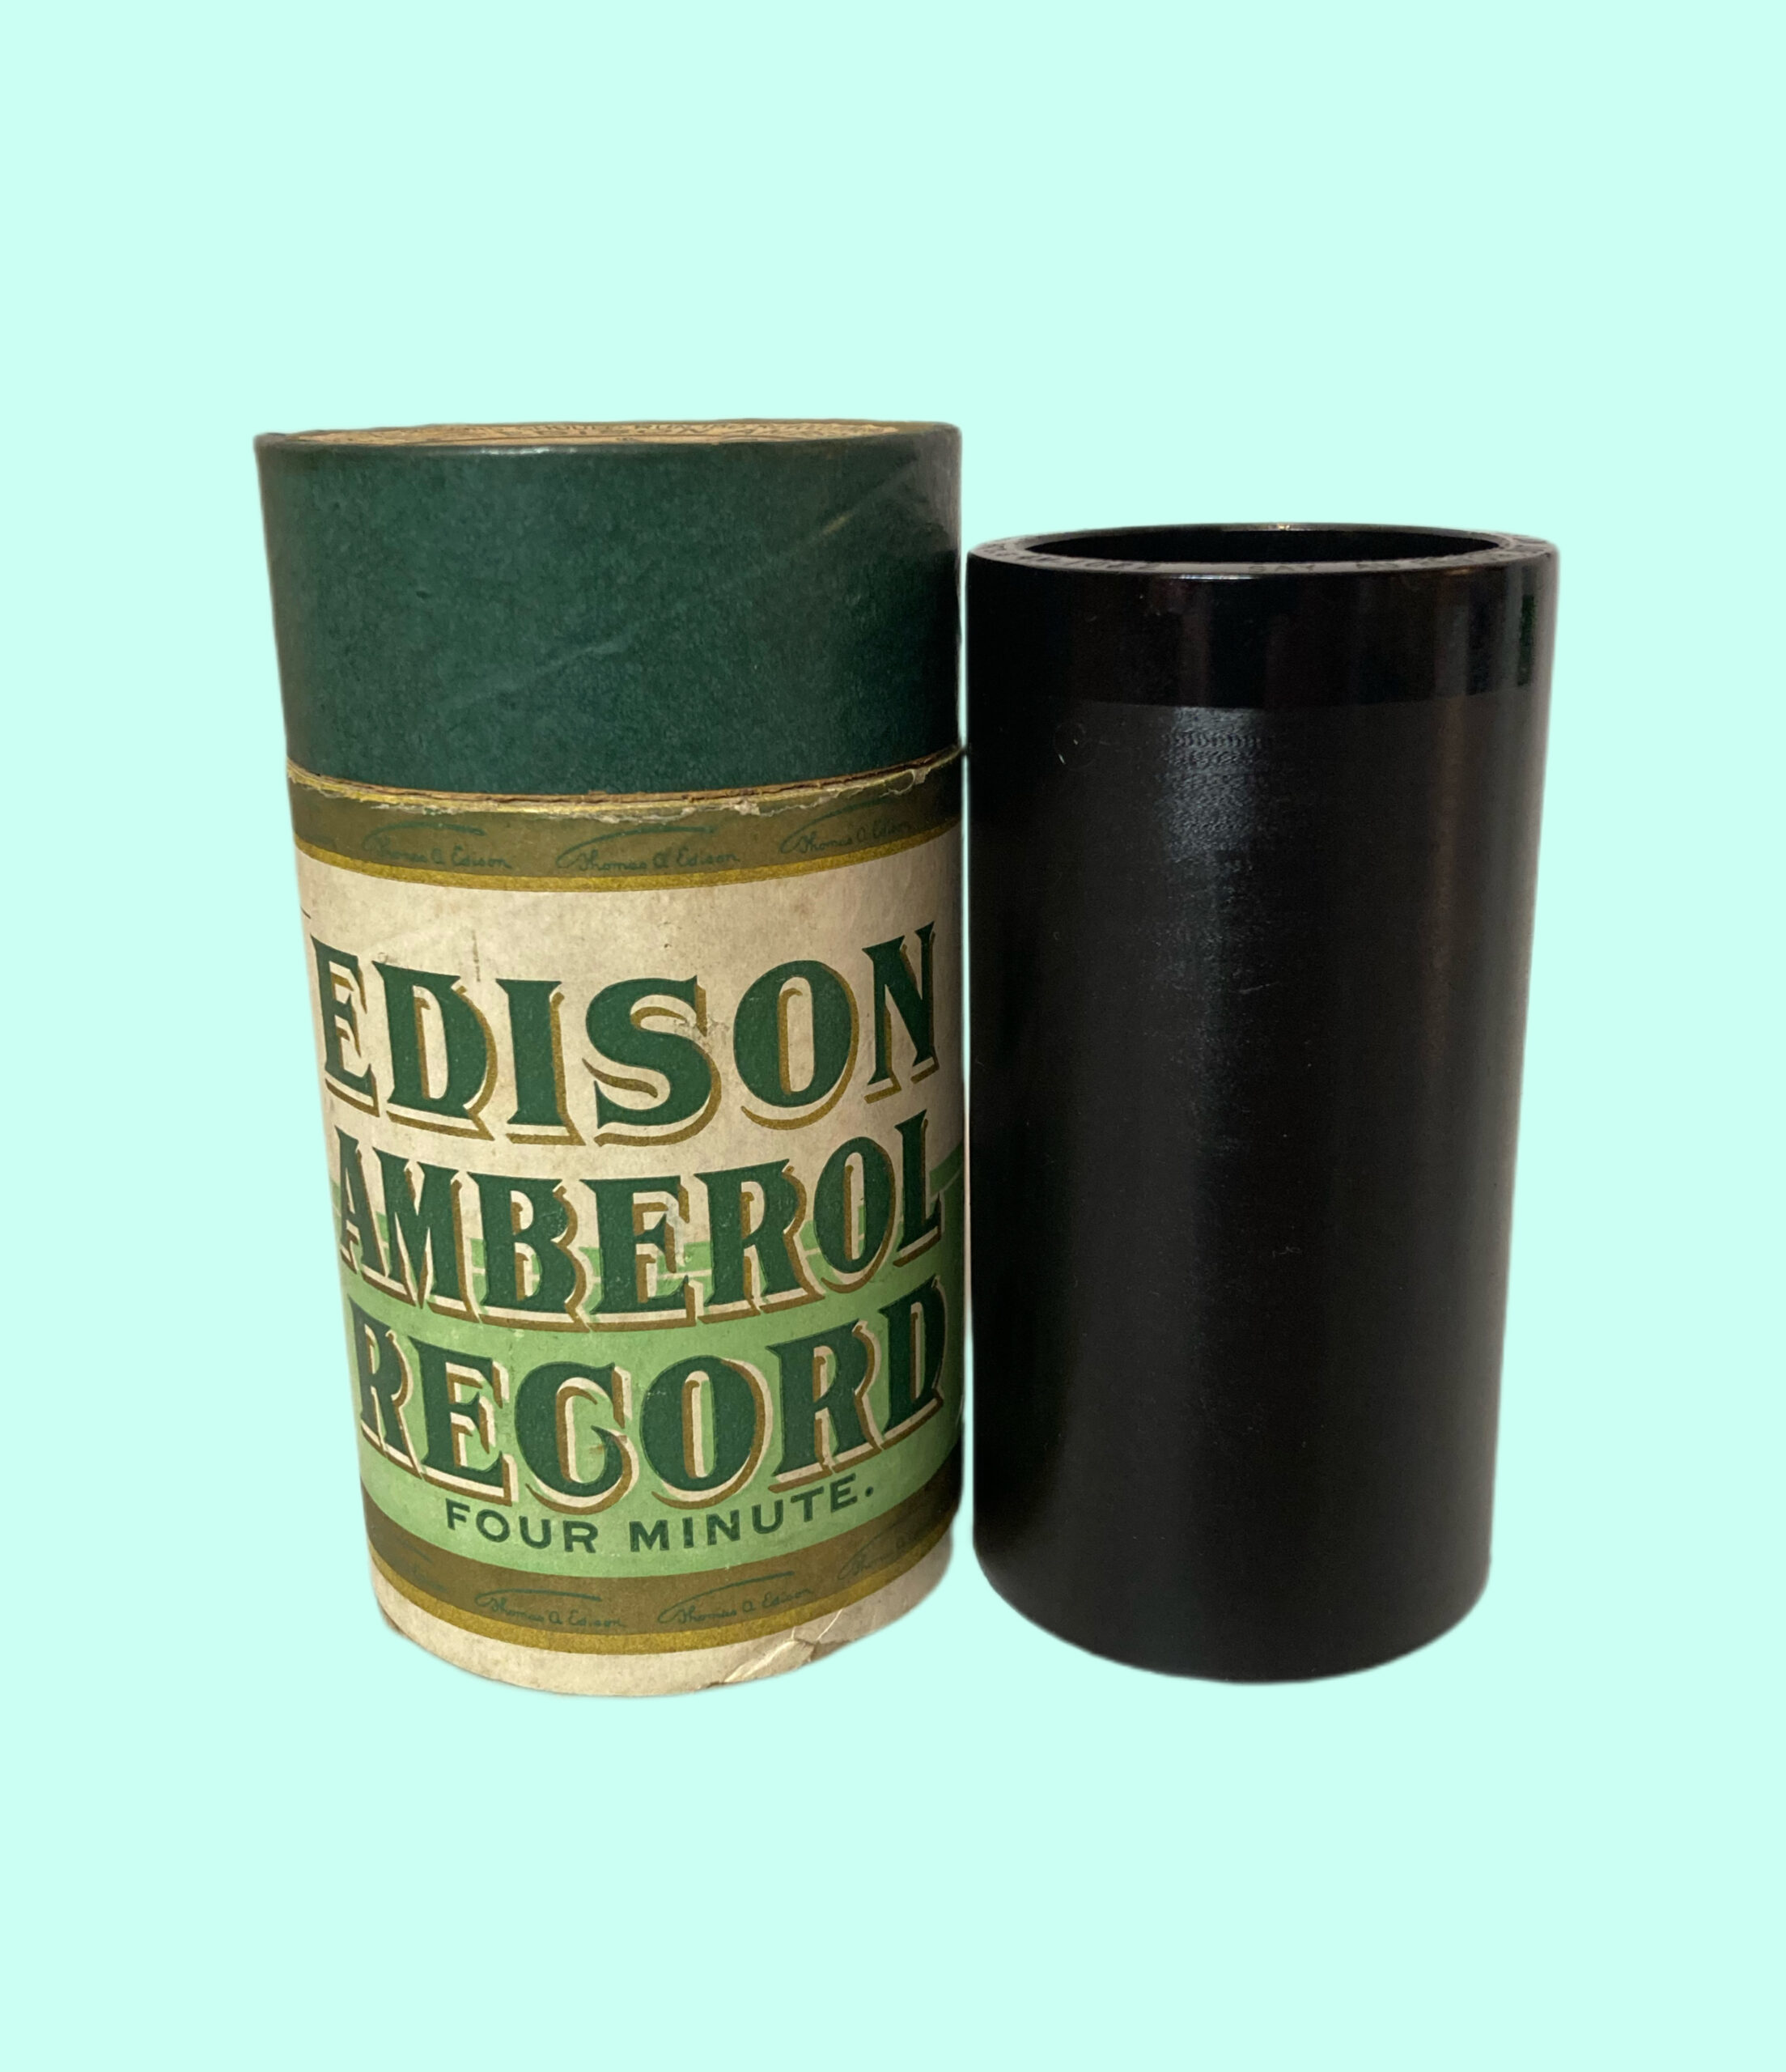 Edison 4 min. Cylinder… “ By The Suwanee River”